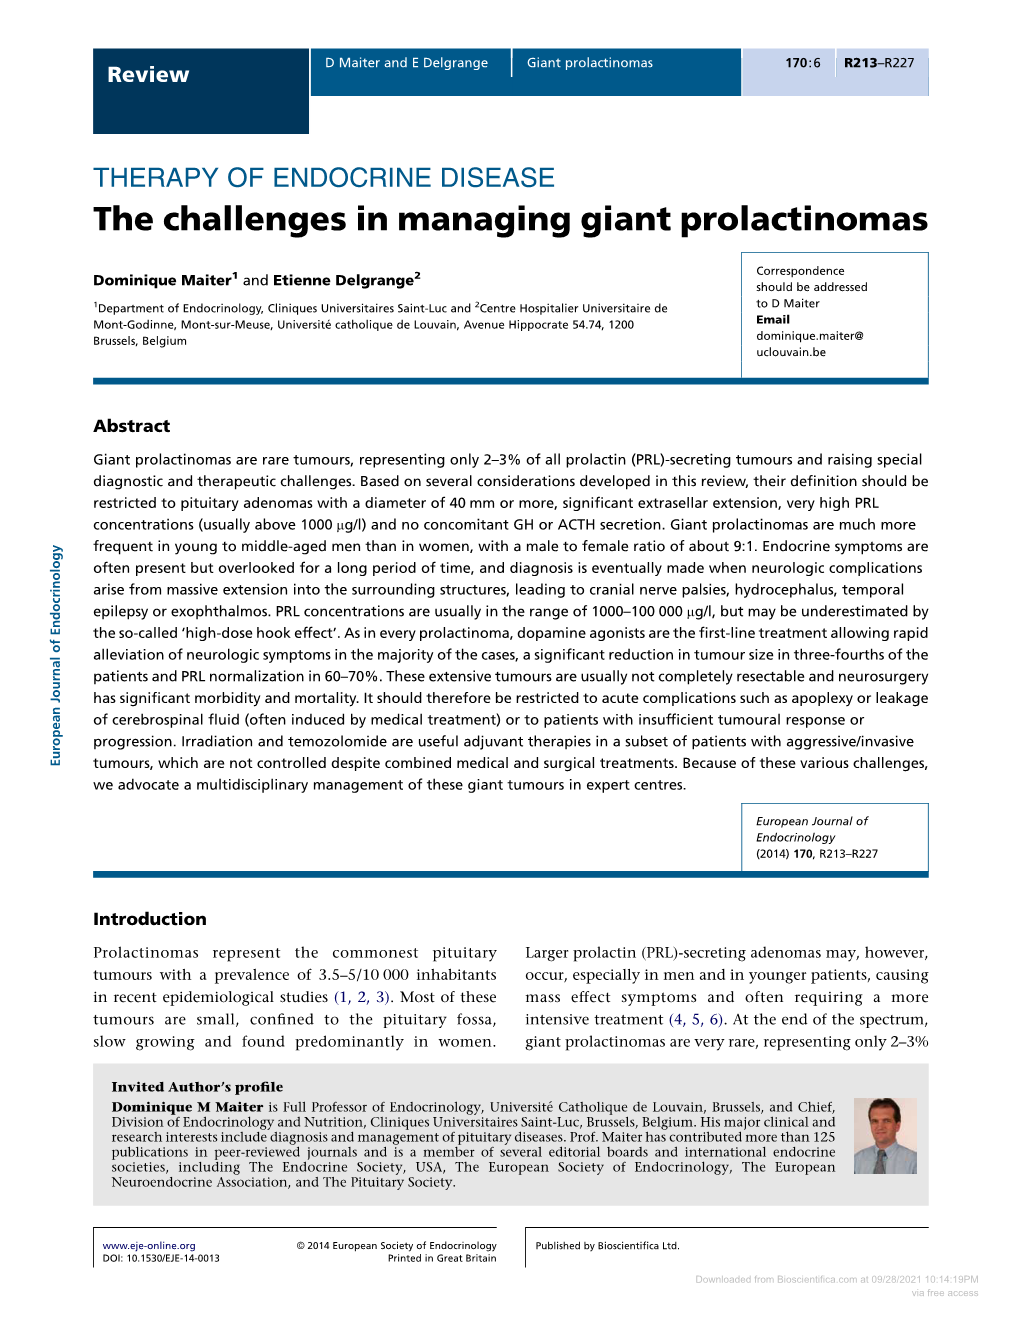 The Challenges in Managing Giant Prolactinomas